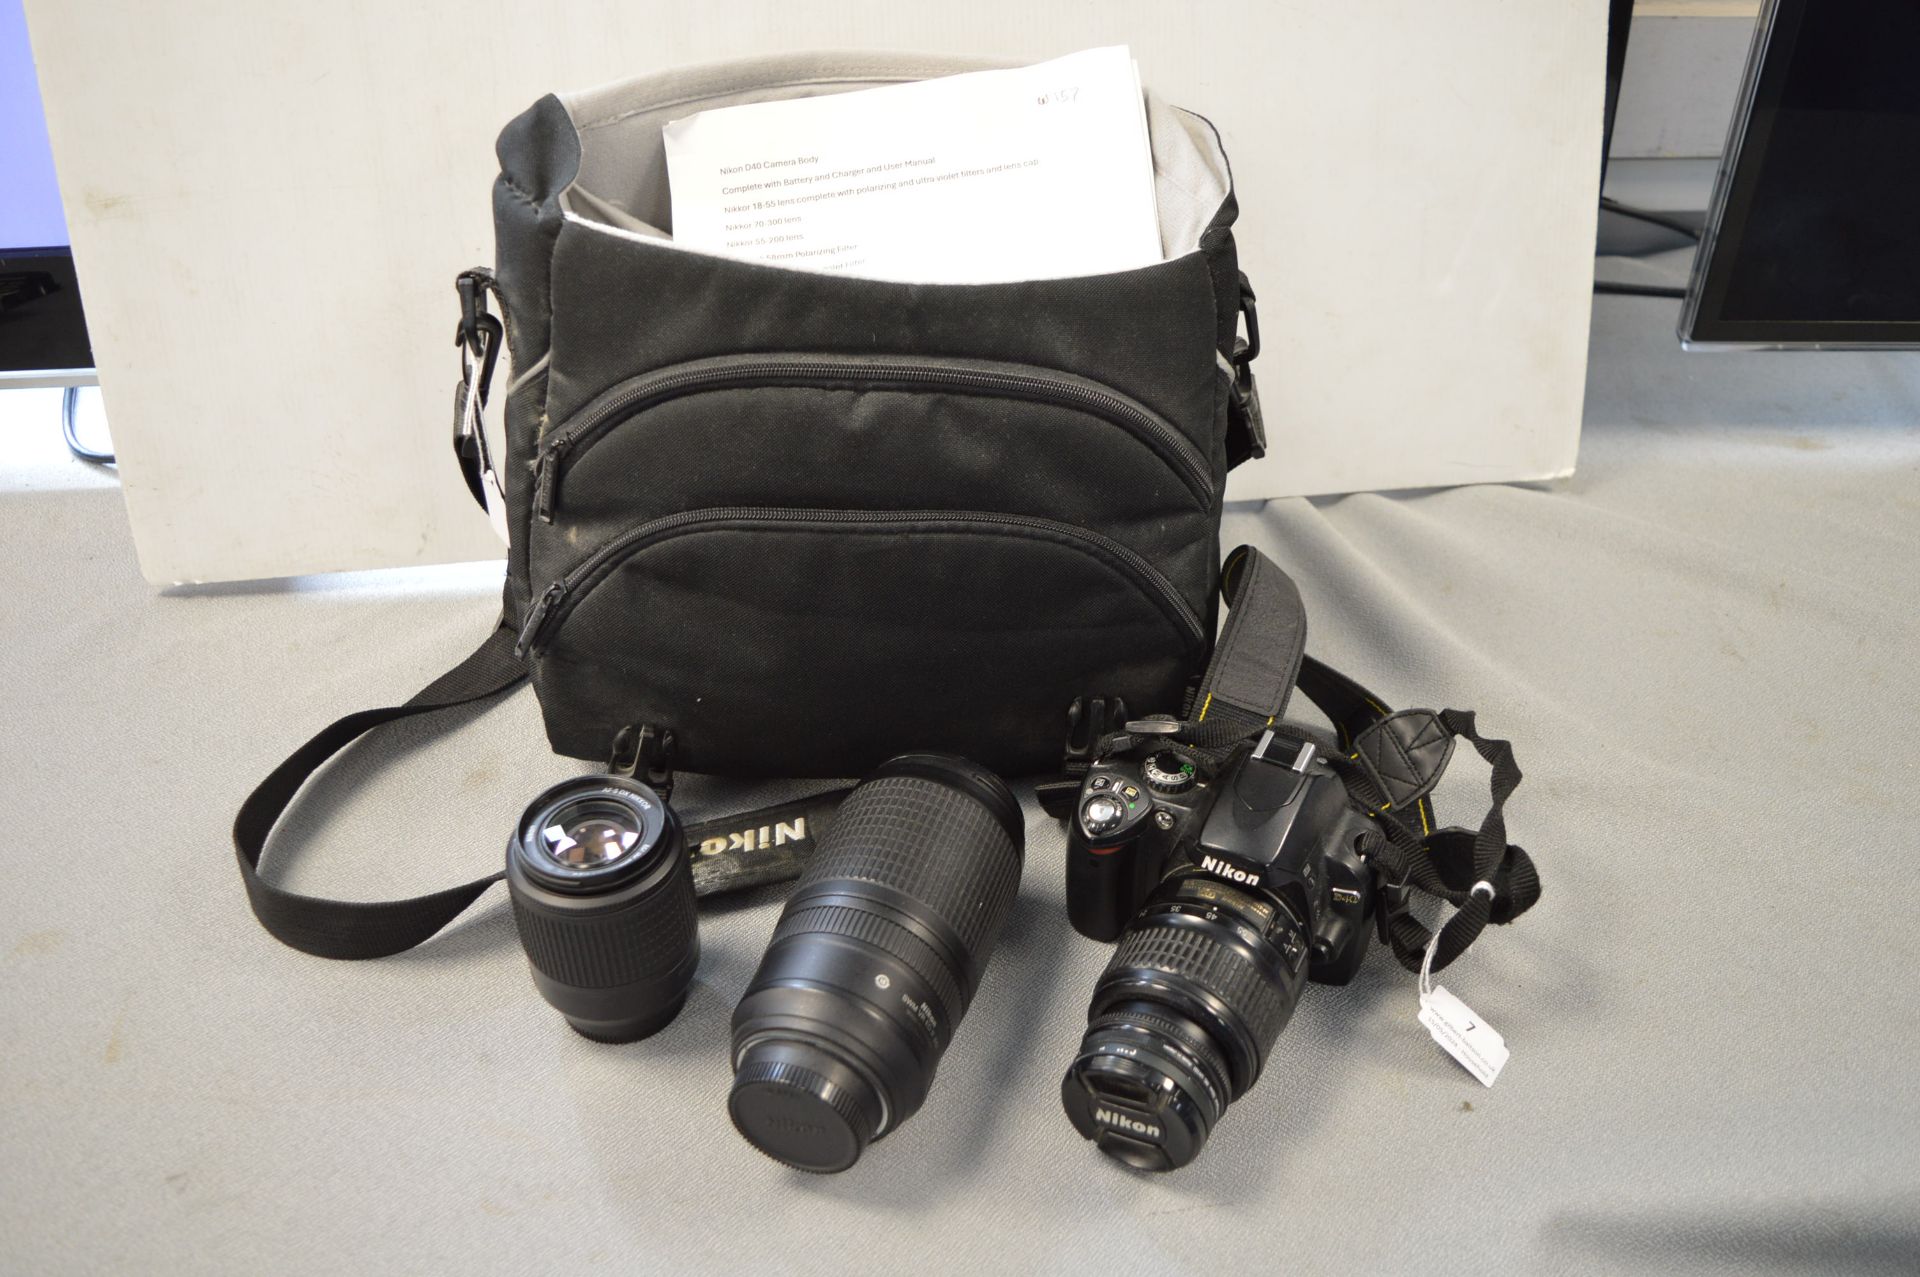 Nikon D40 Camera Body with Nikkor Lenses, Camera Bag, and Accessories